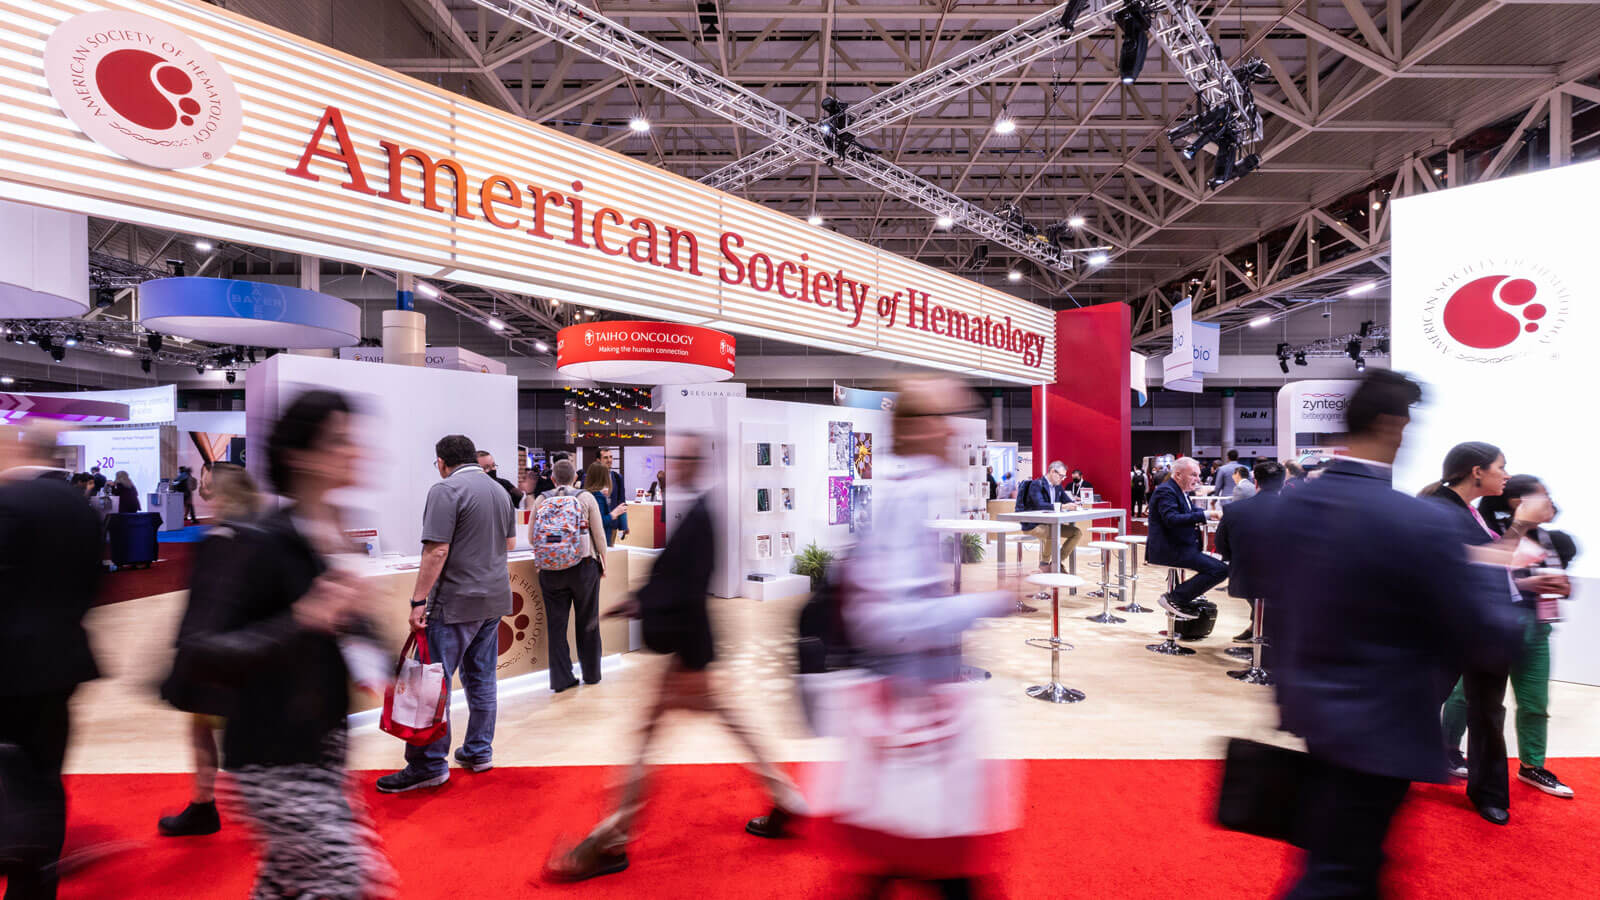 people walking by in front of the American Society of Hematology booth